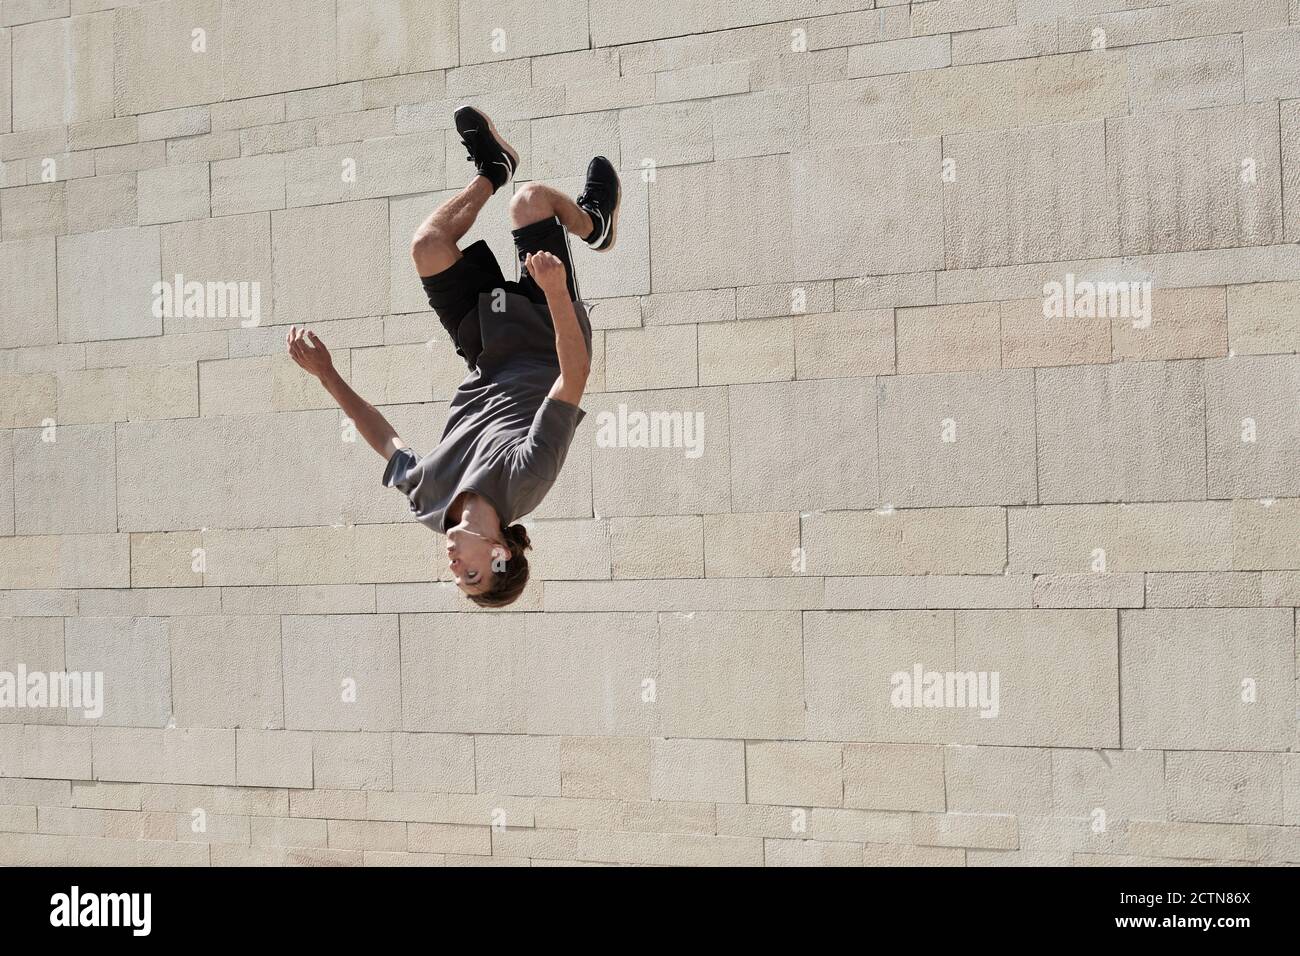 Upside down of young male doing somersault while practicing parkour in urban area in summer Stock Photo